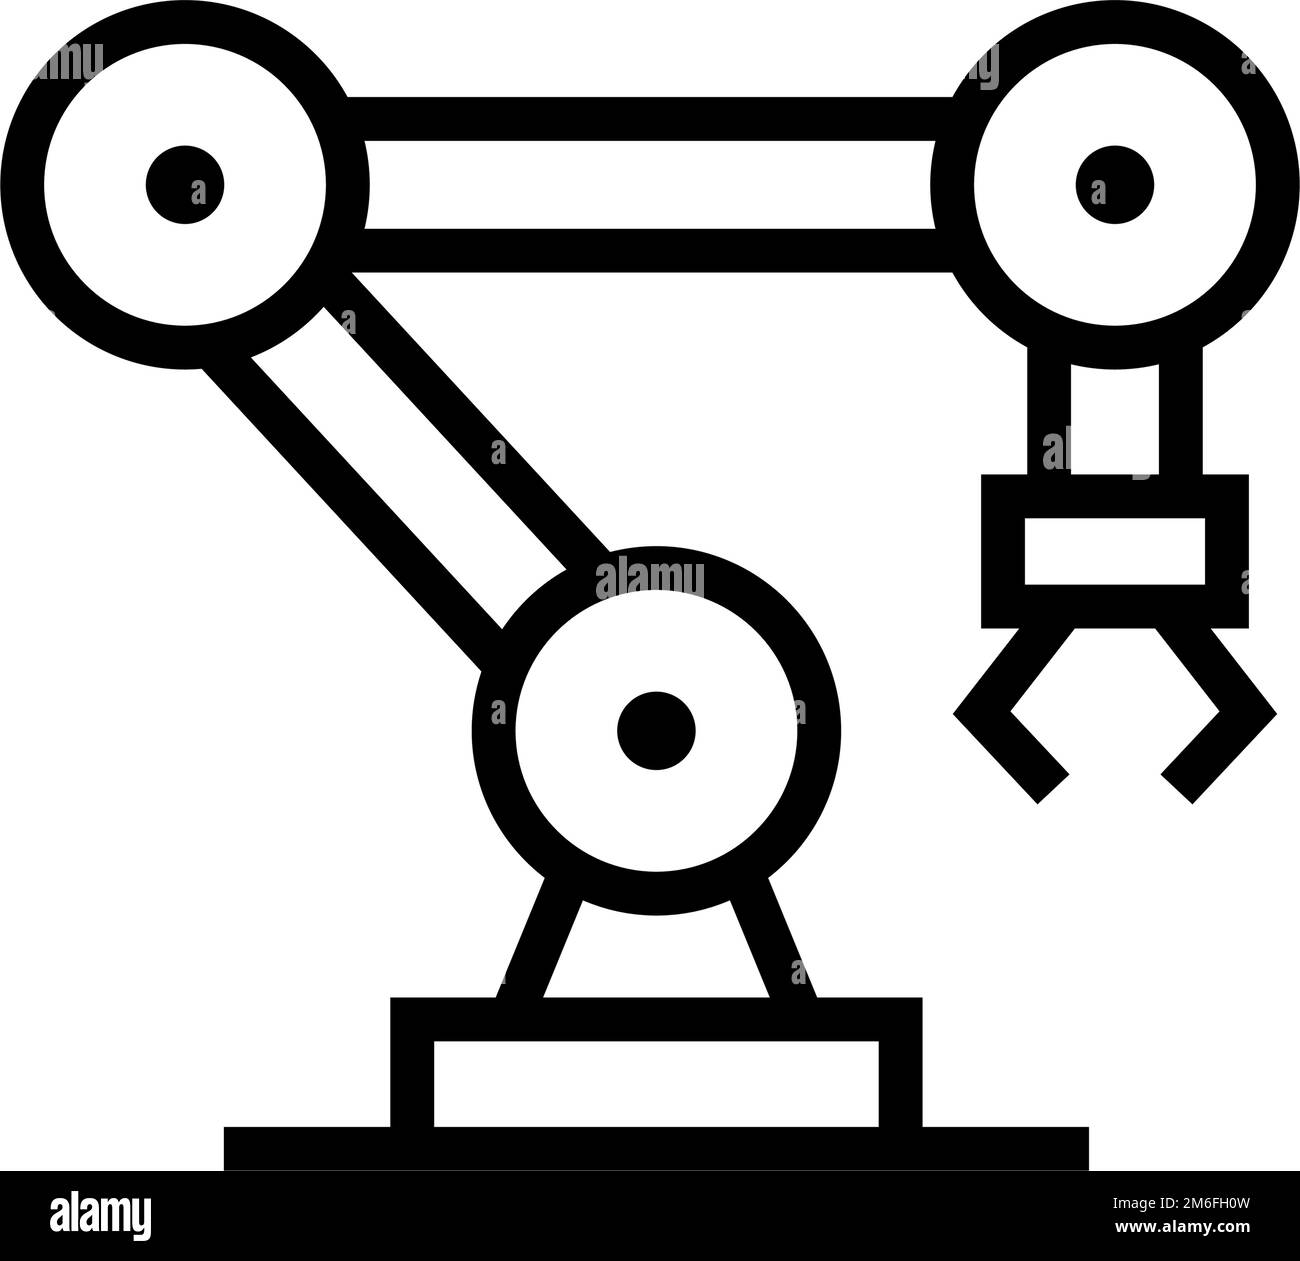 Simple robot arm icon. Automation of line work. Manufacturing. Editable vector. Stock Vector